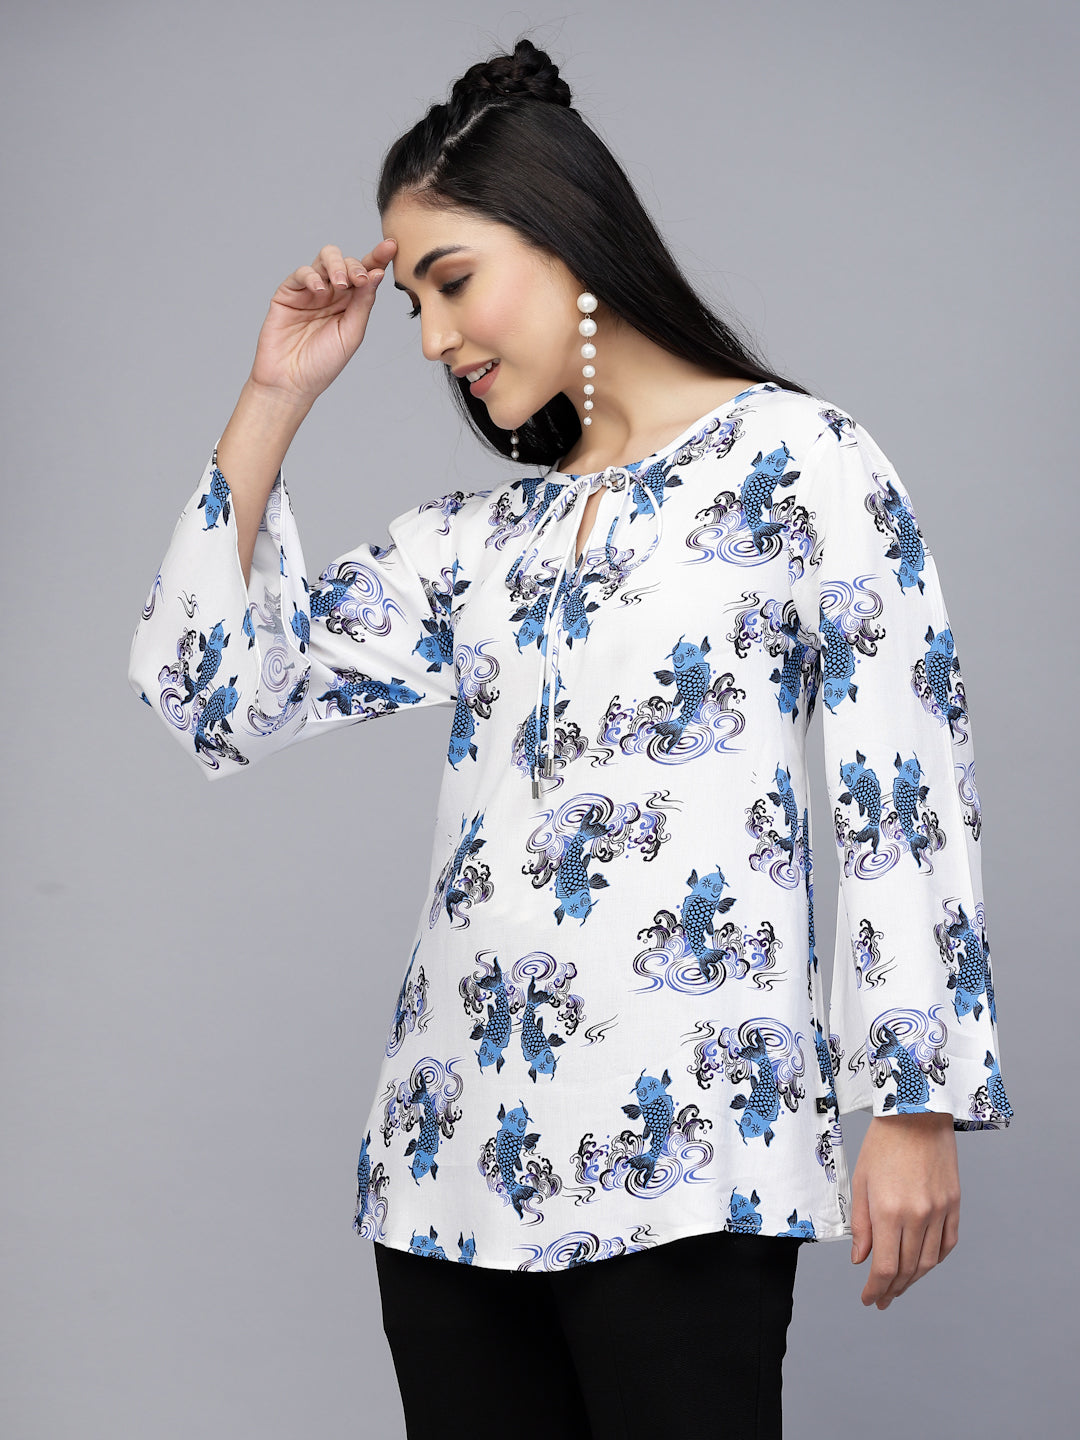 Valbone Women’s White & Blue Rayon Floral Printed Top